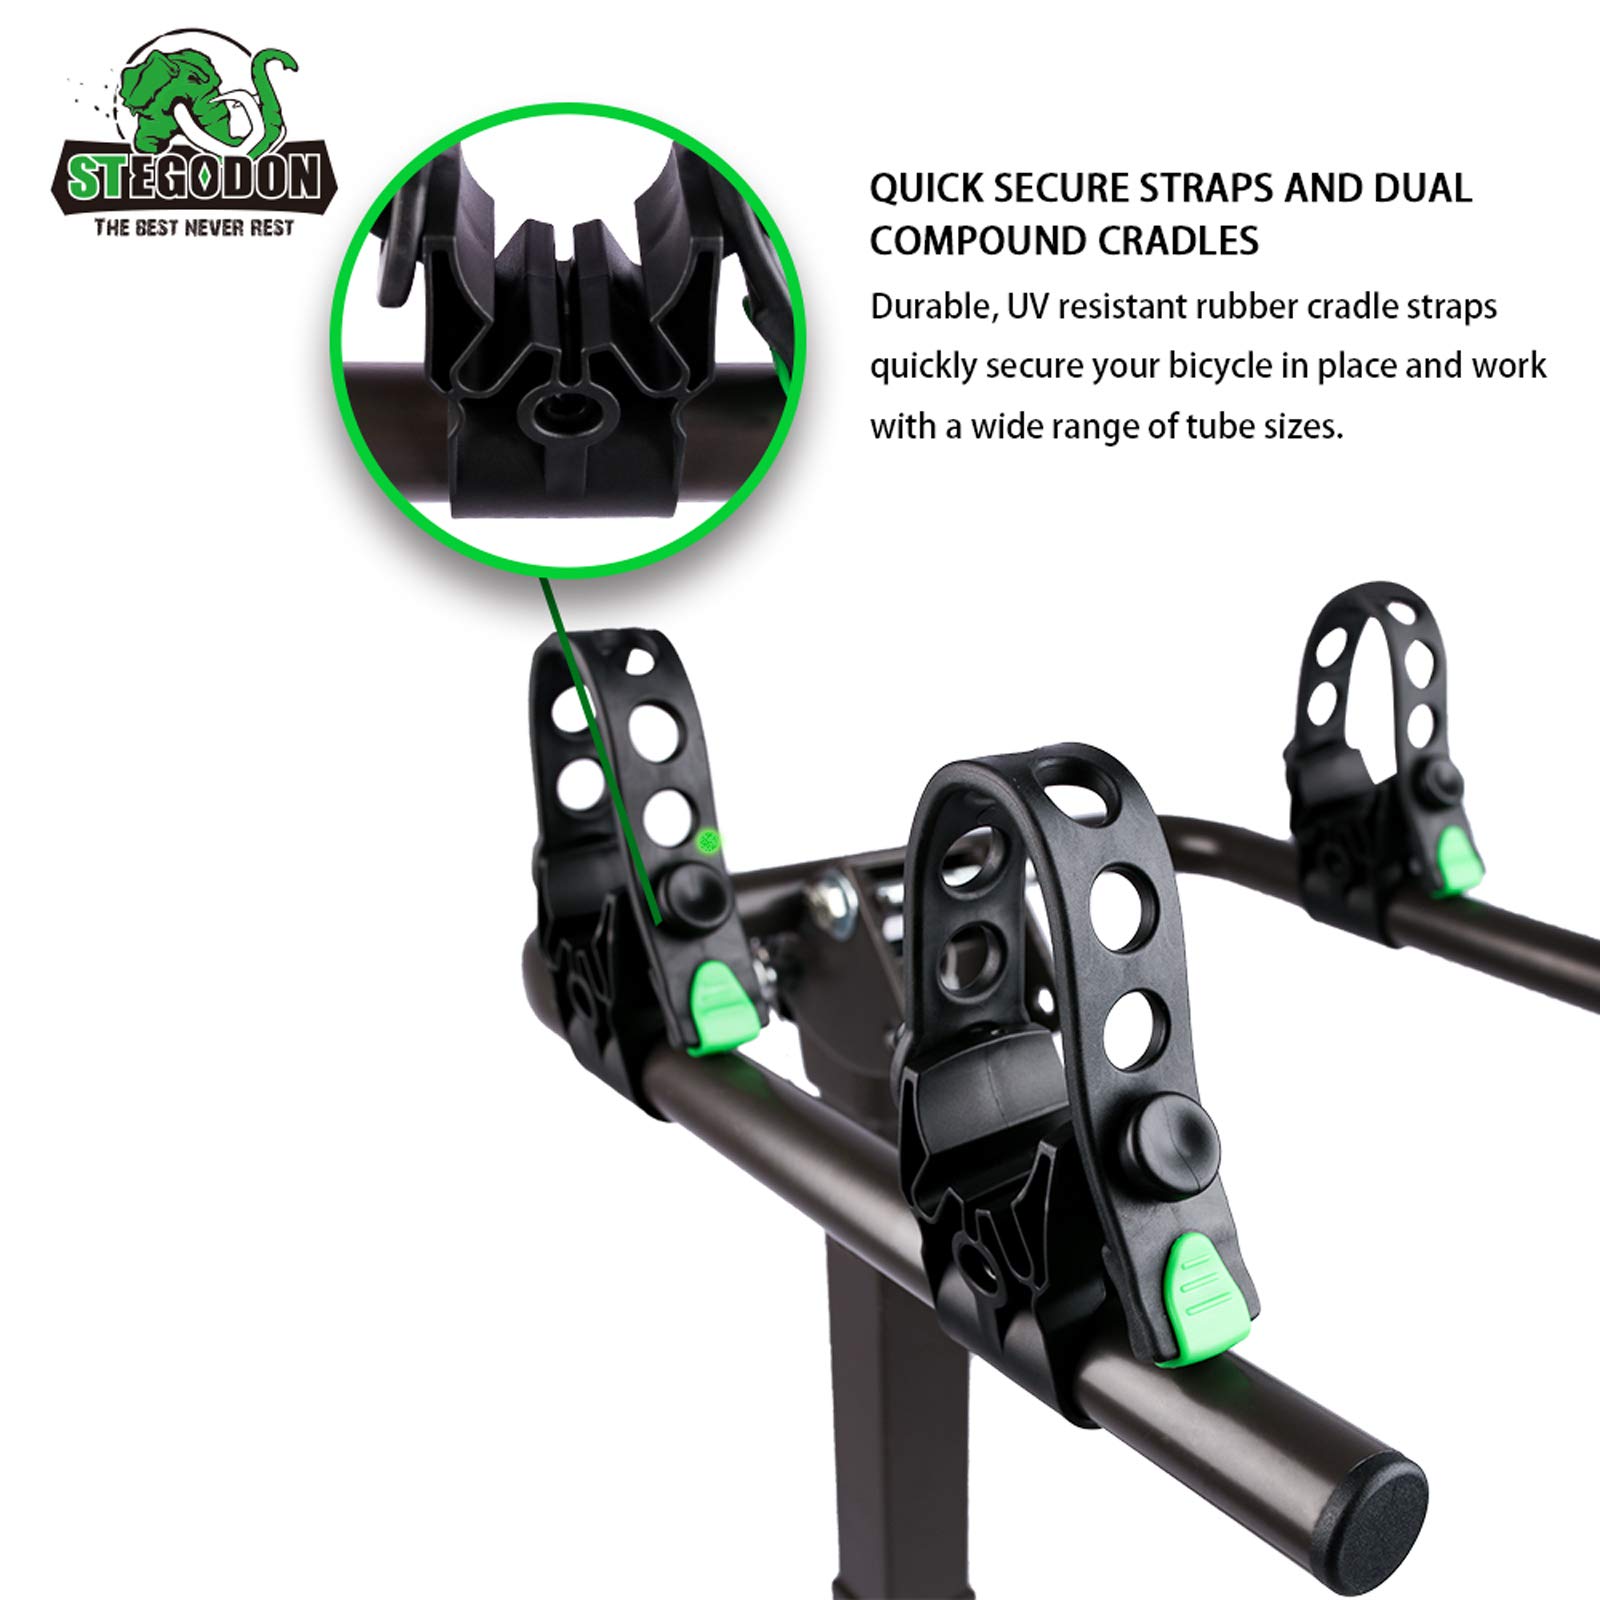 STEGODON 2 Bike Hitch Rack 2'' Hitch Receiver Heavy Duty Bicycle Carrier Racks Hitch Mount Double Foldable Rack for Cars, Trucks, SUV，Hatchback RV，Tow Hitch and Minivans